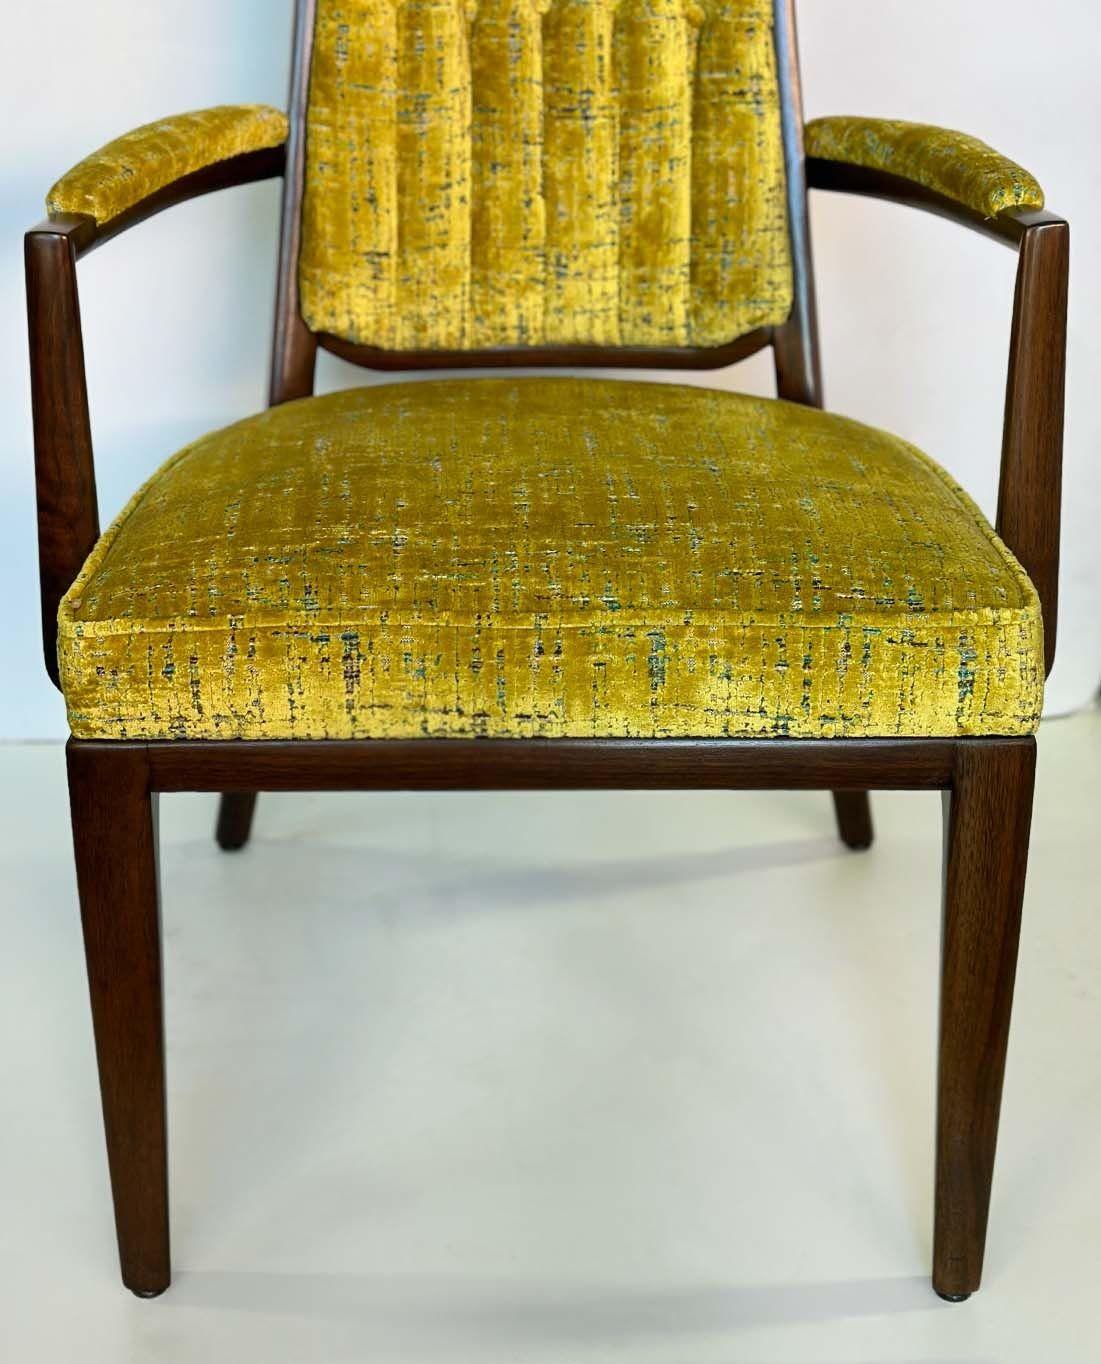 Set of 10 Vintage Monteverdi Young Chairs & Armchairs, c. 1950's For Sale 1